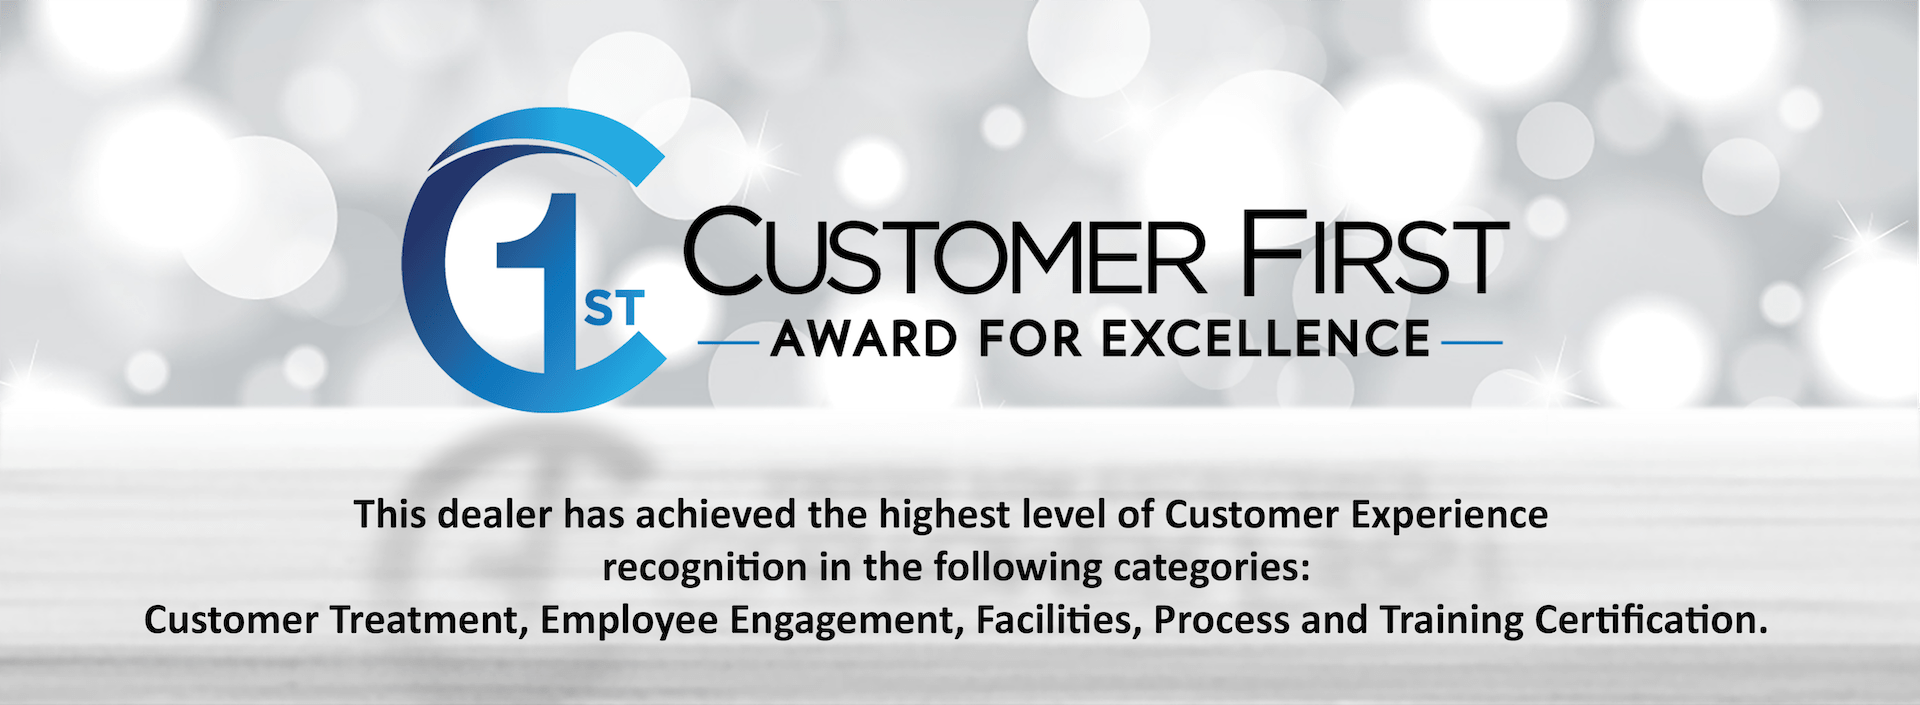 Customer First Award for Excellence